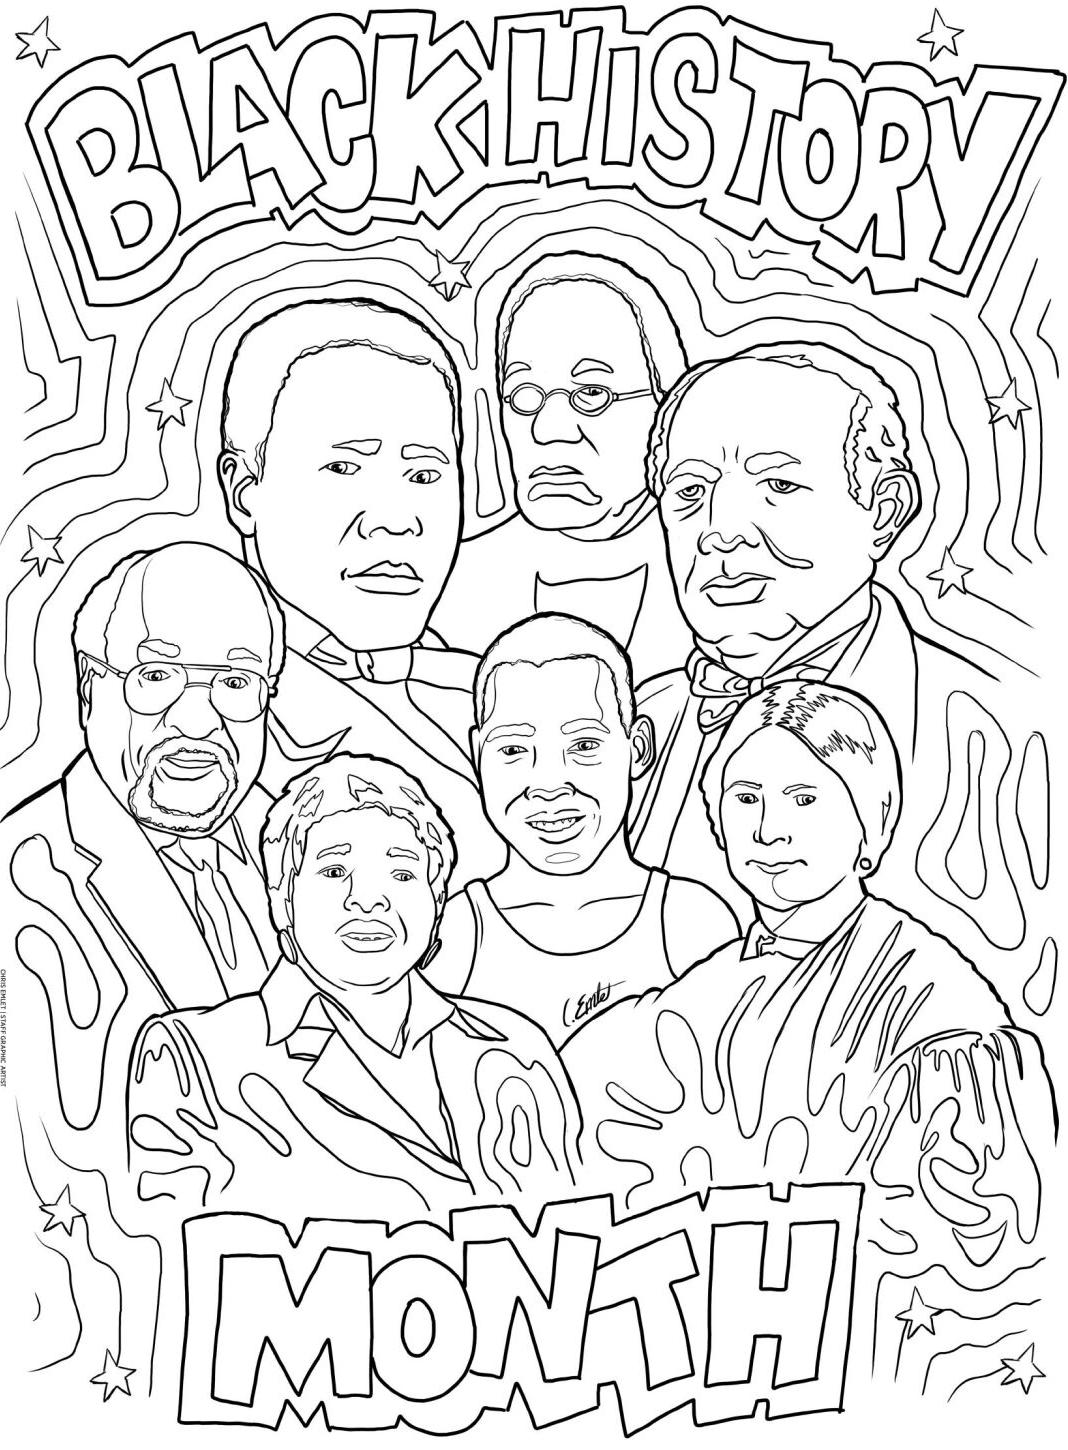 Best Black History Month Coloring Pages 20